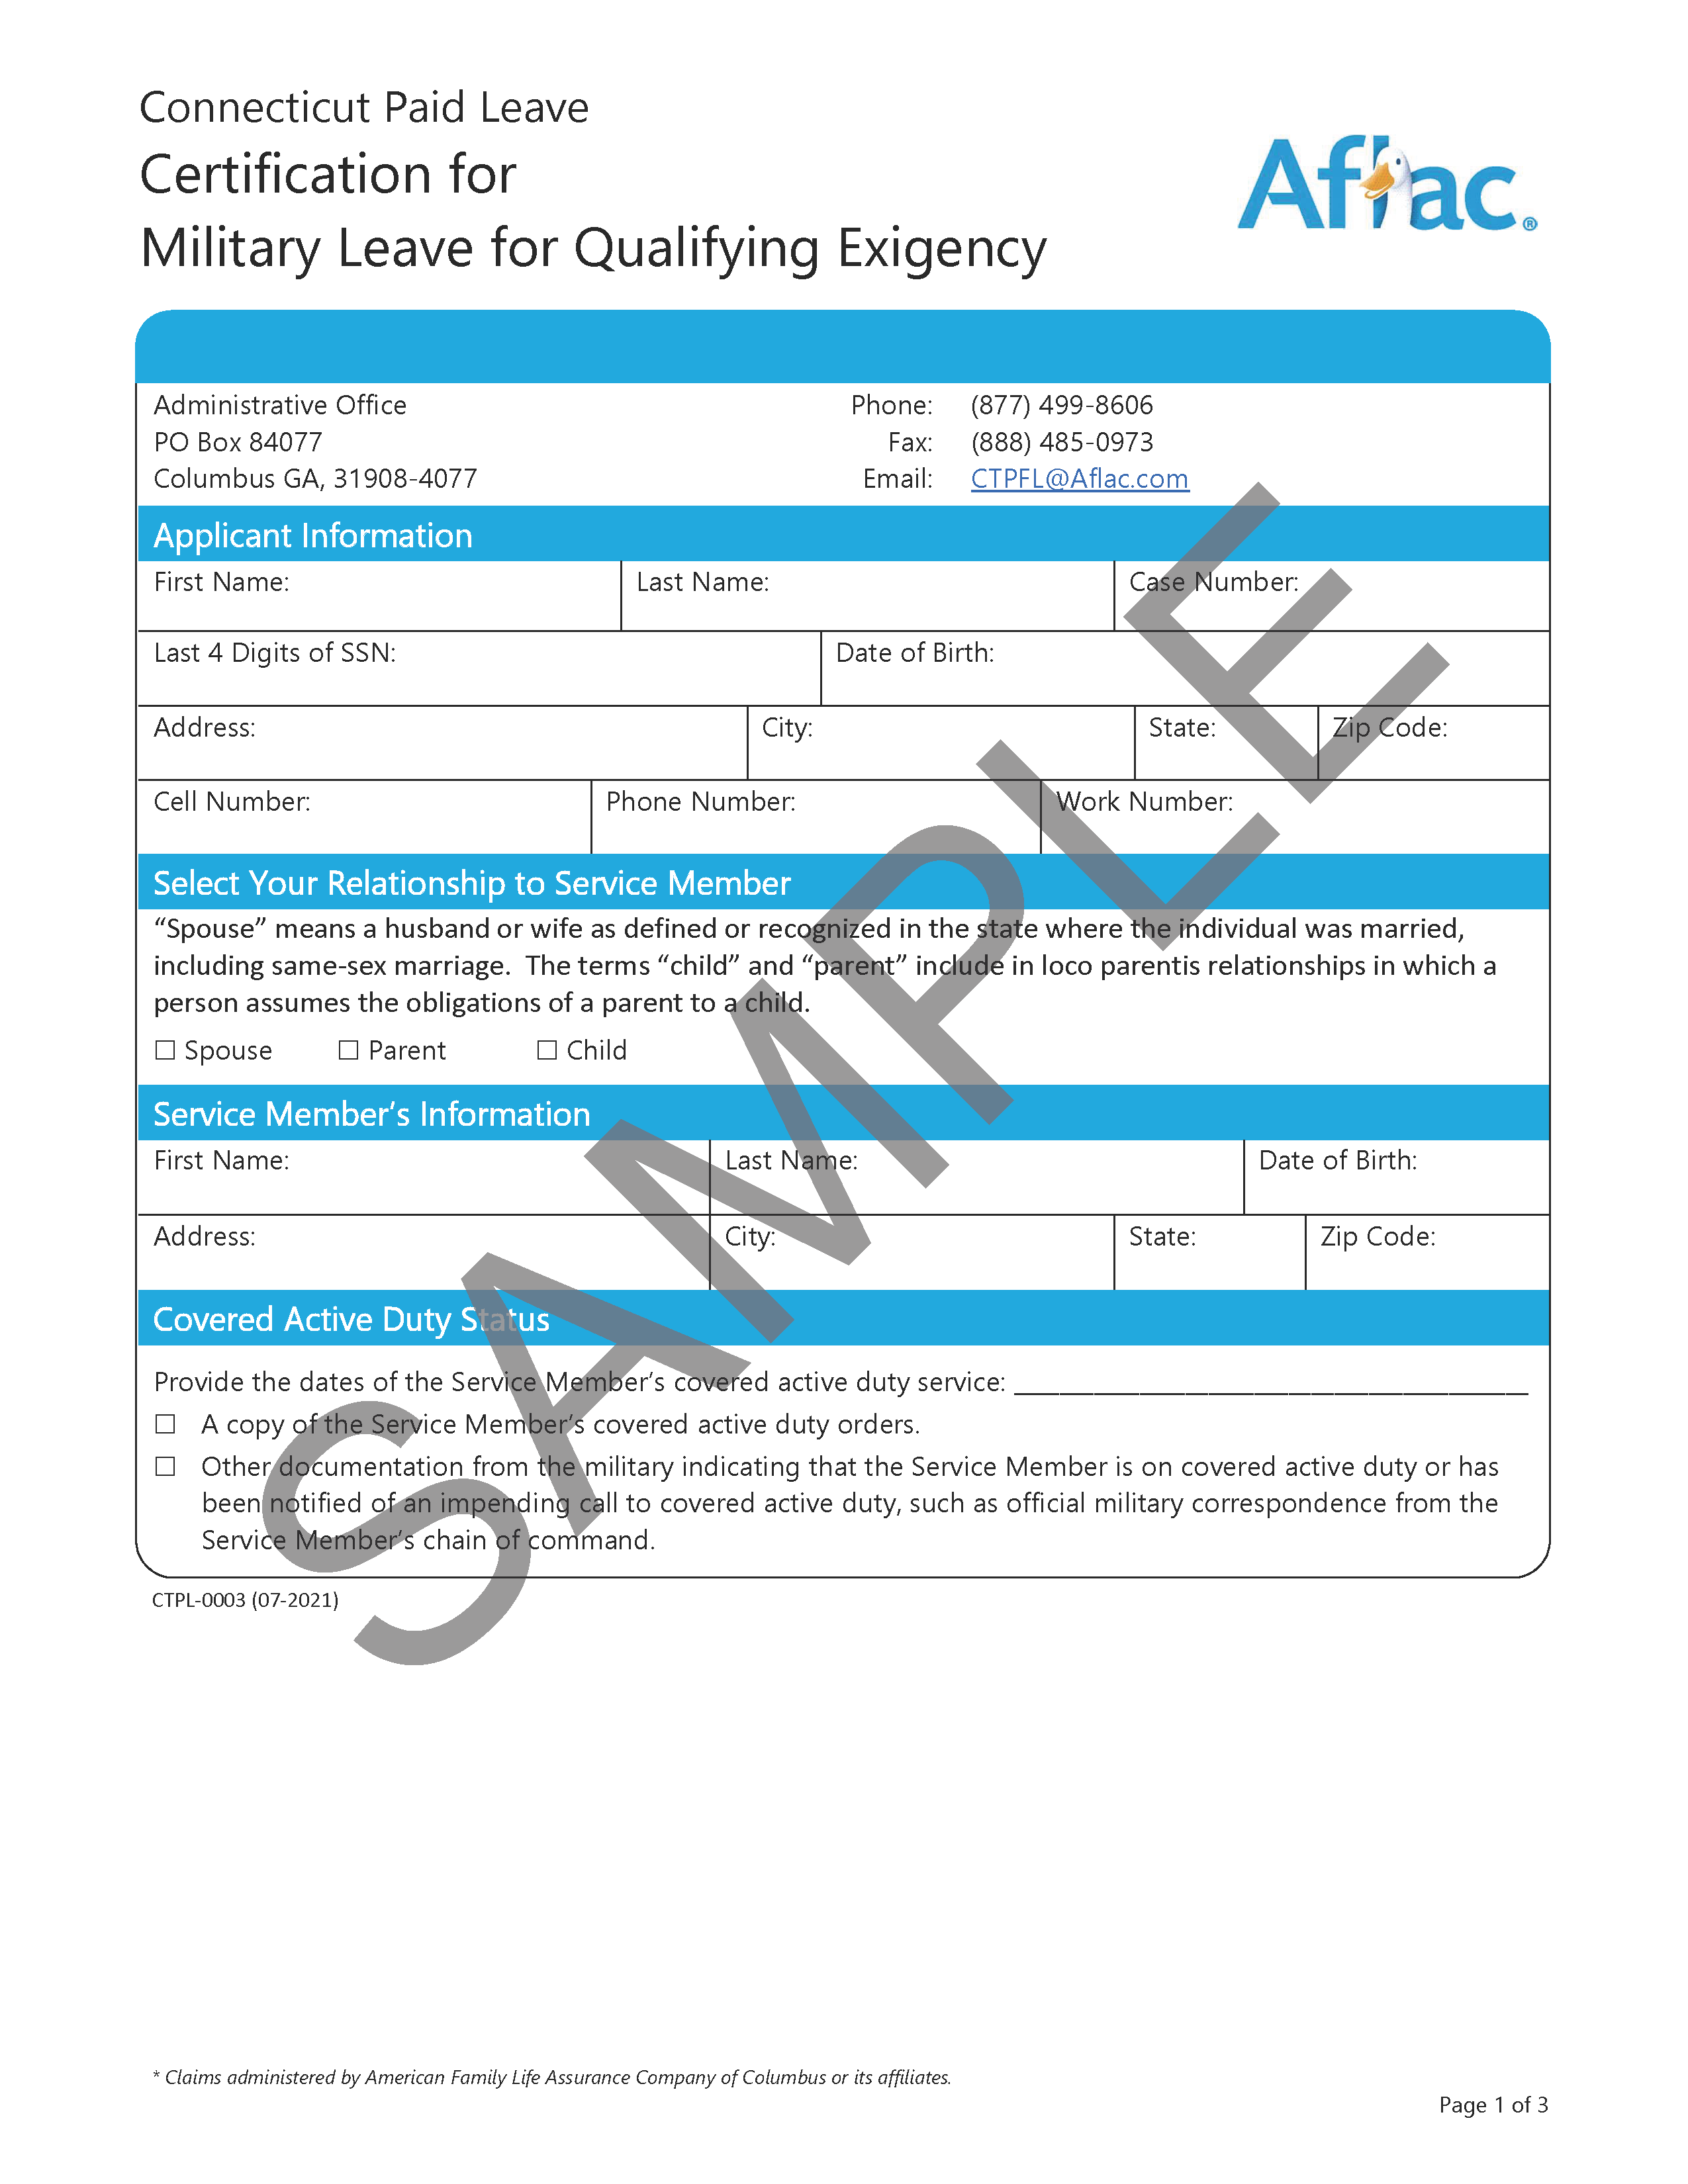 Sample Certification for Military Leave for Qualifying Exigency form